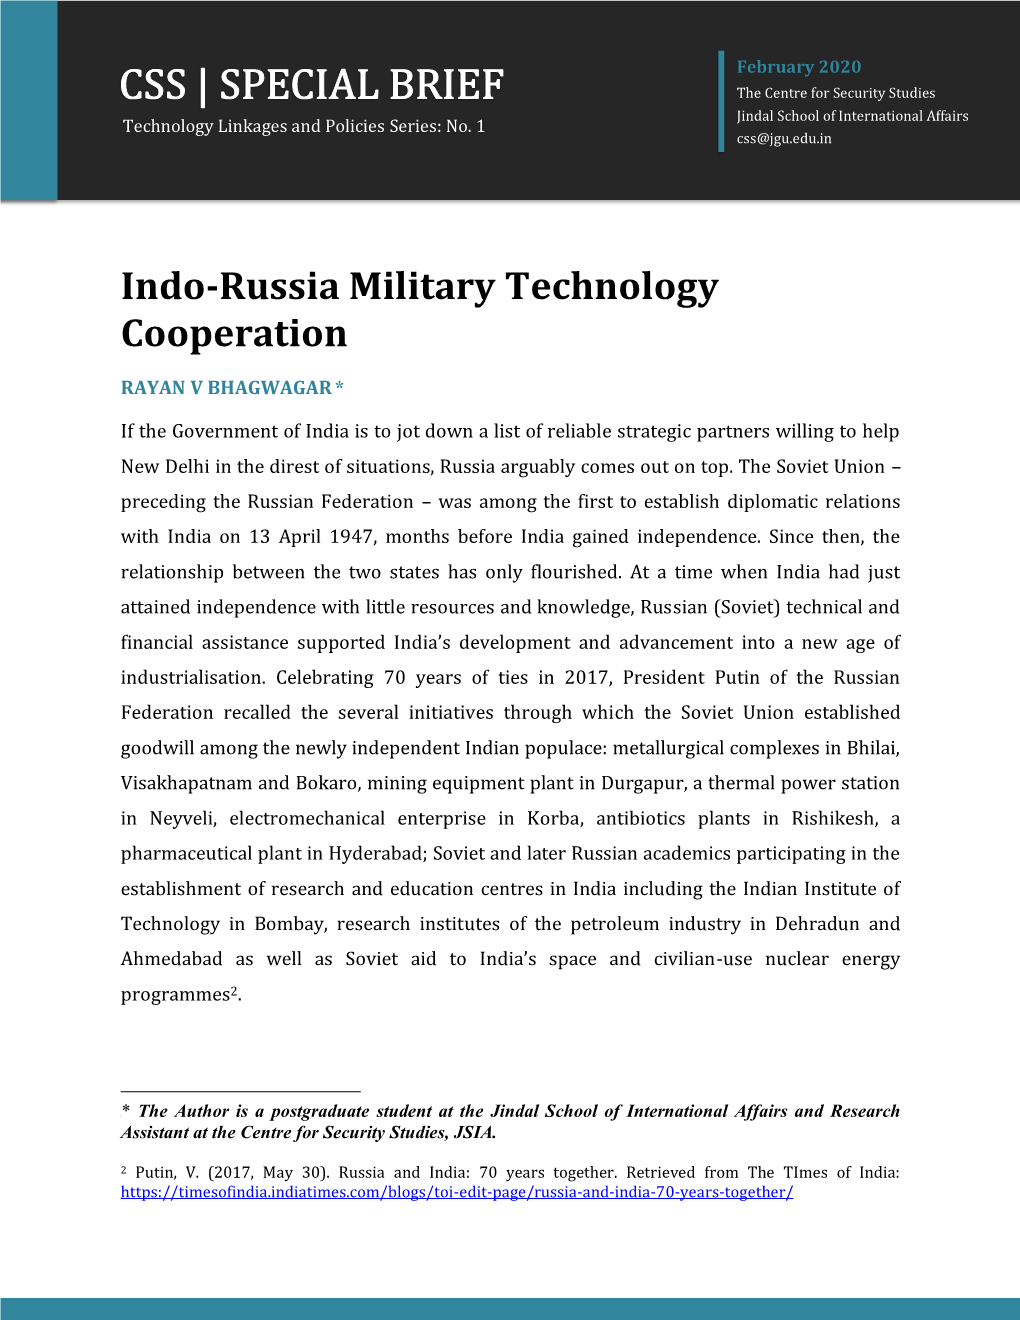 Indo-Russia Military Technology Cooperation